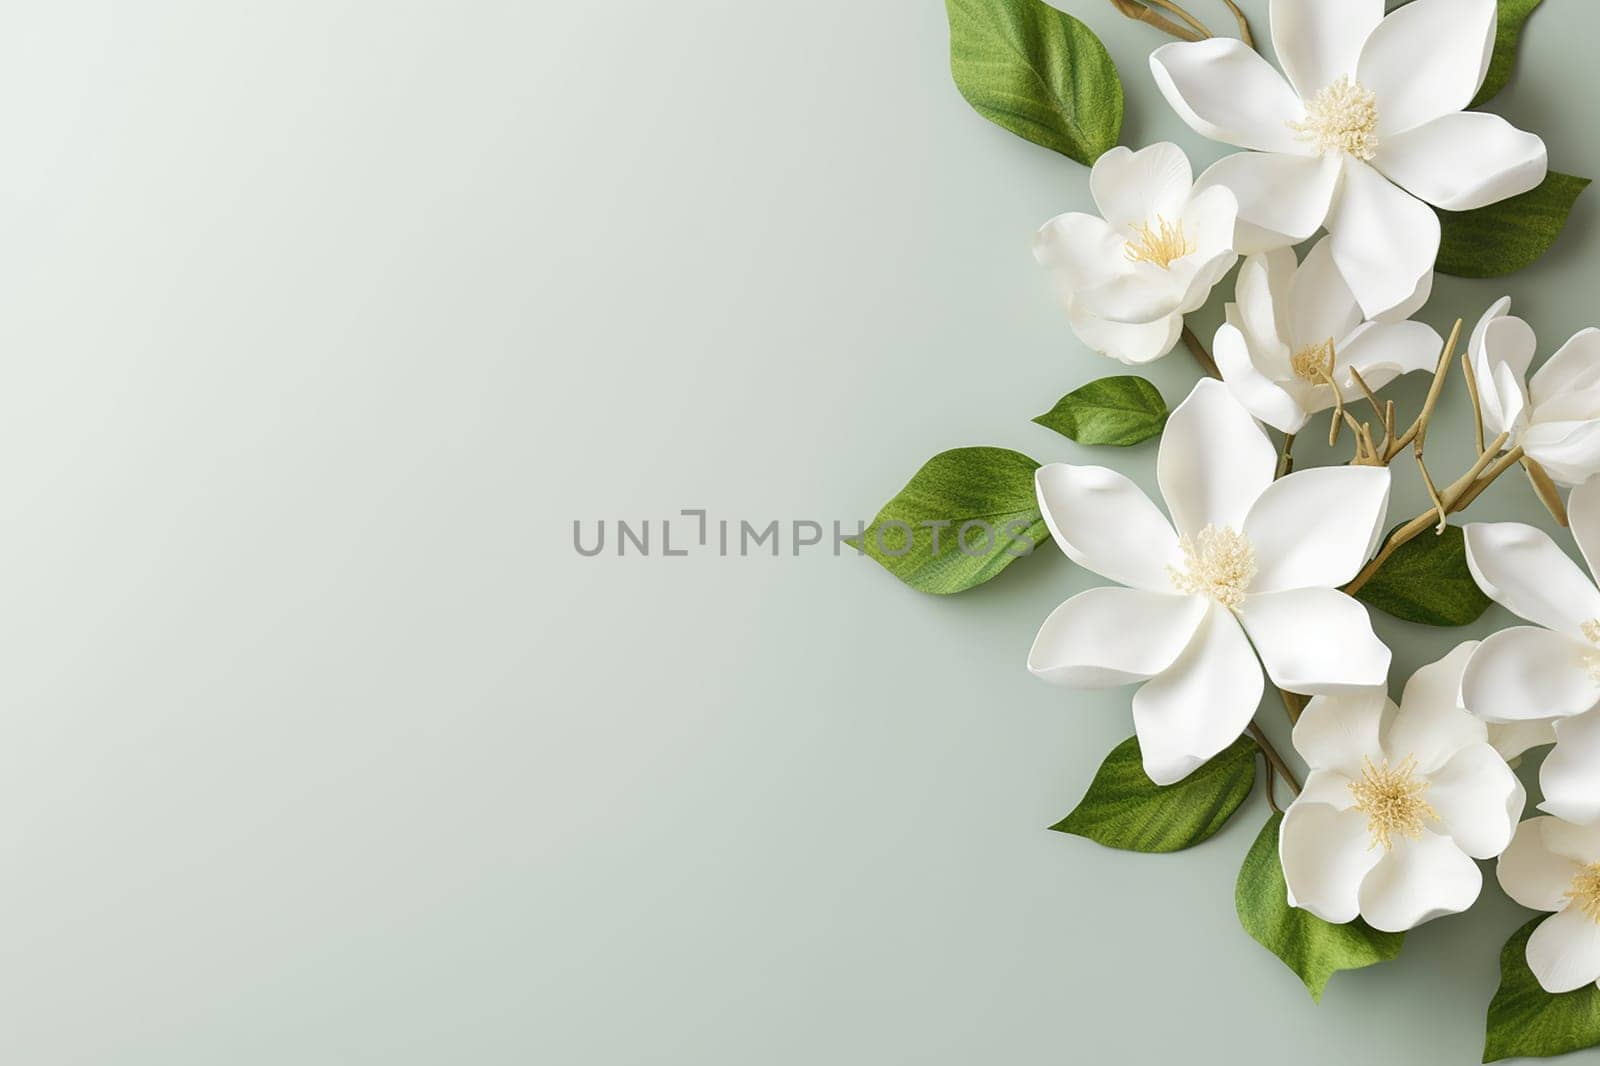 Elegant white flowers with green leaves on pale background by Hype2art